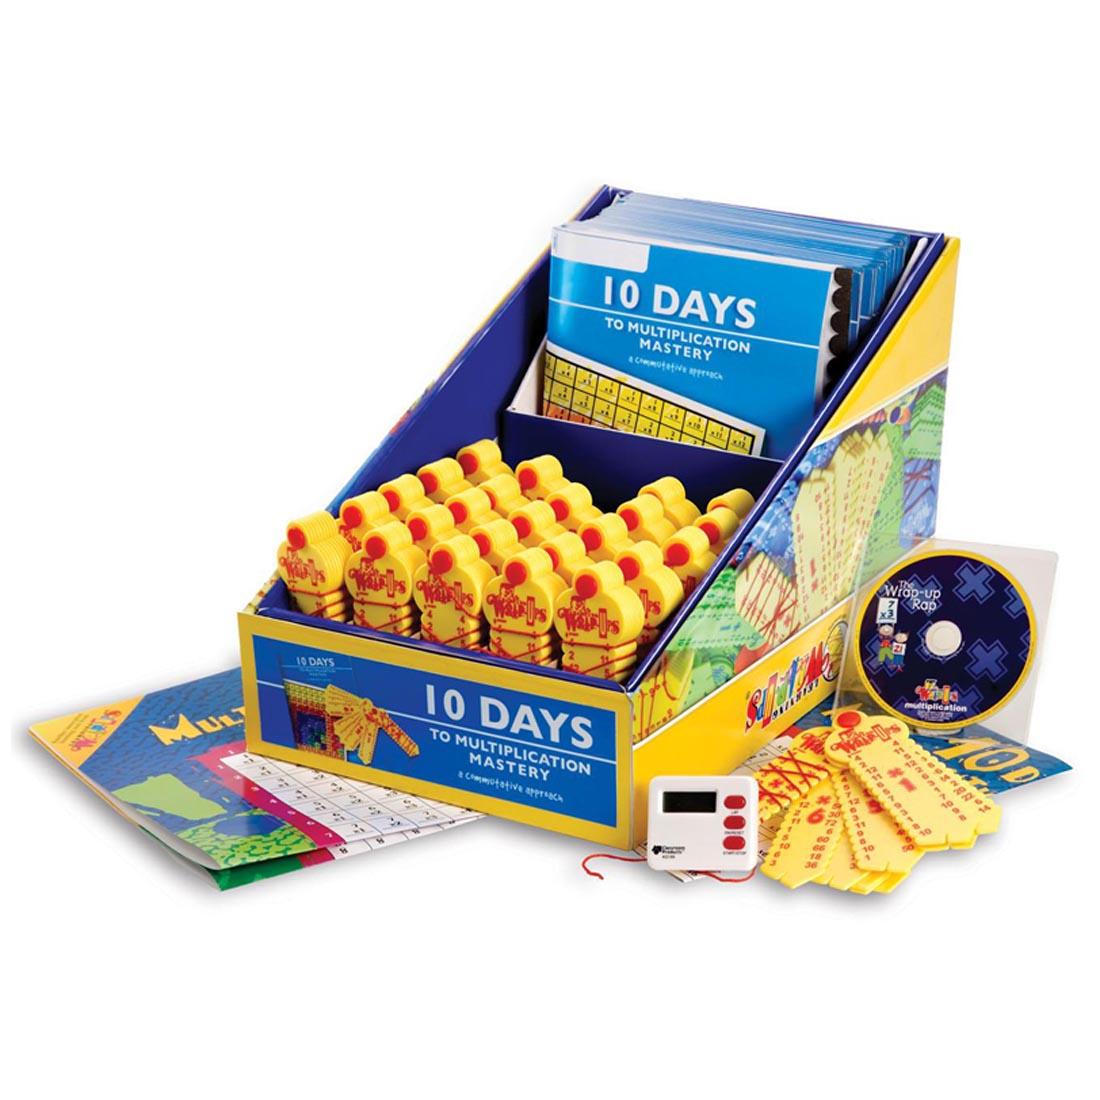 Learning Wrap-Ups 10 Days to Multiplication Mastery Class Kit